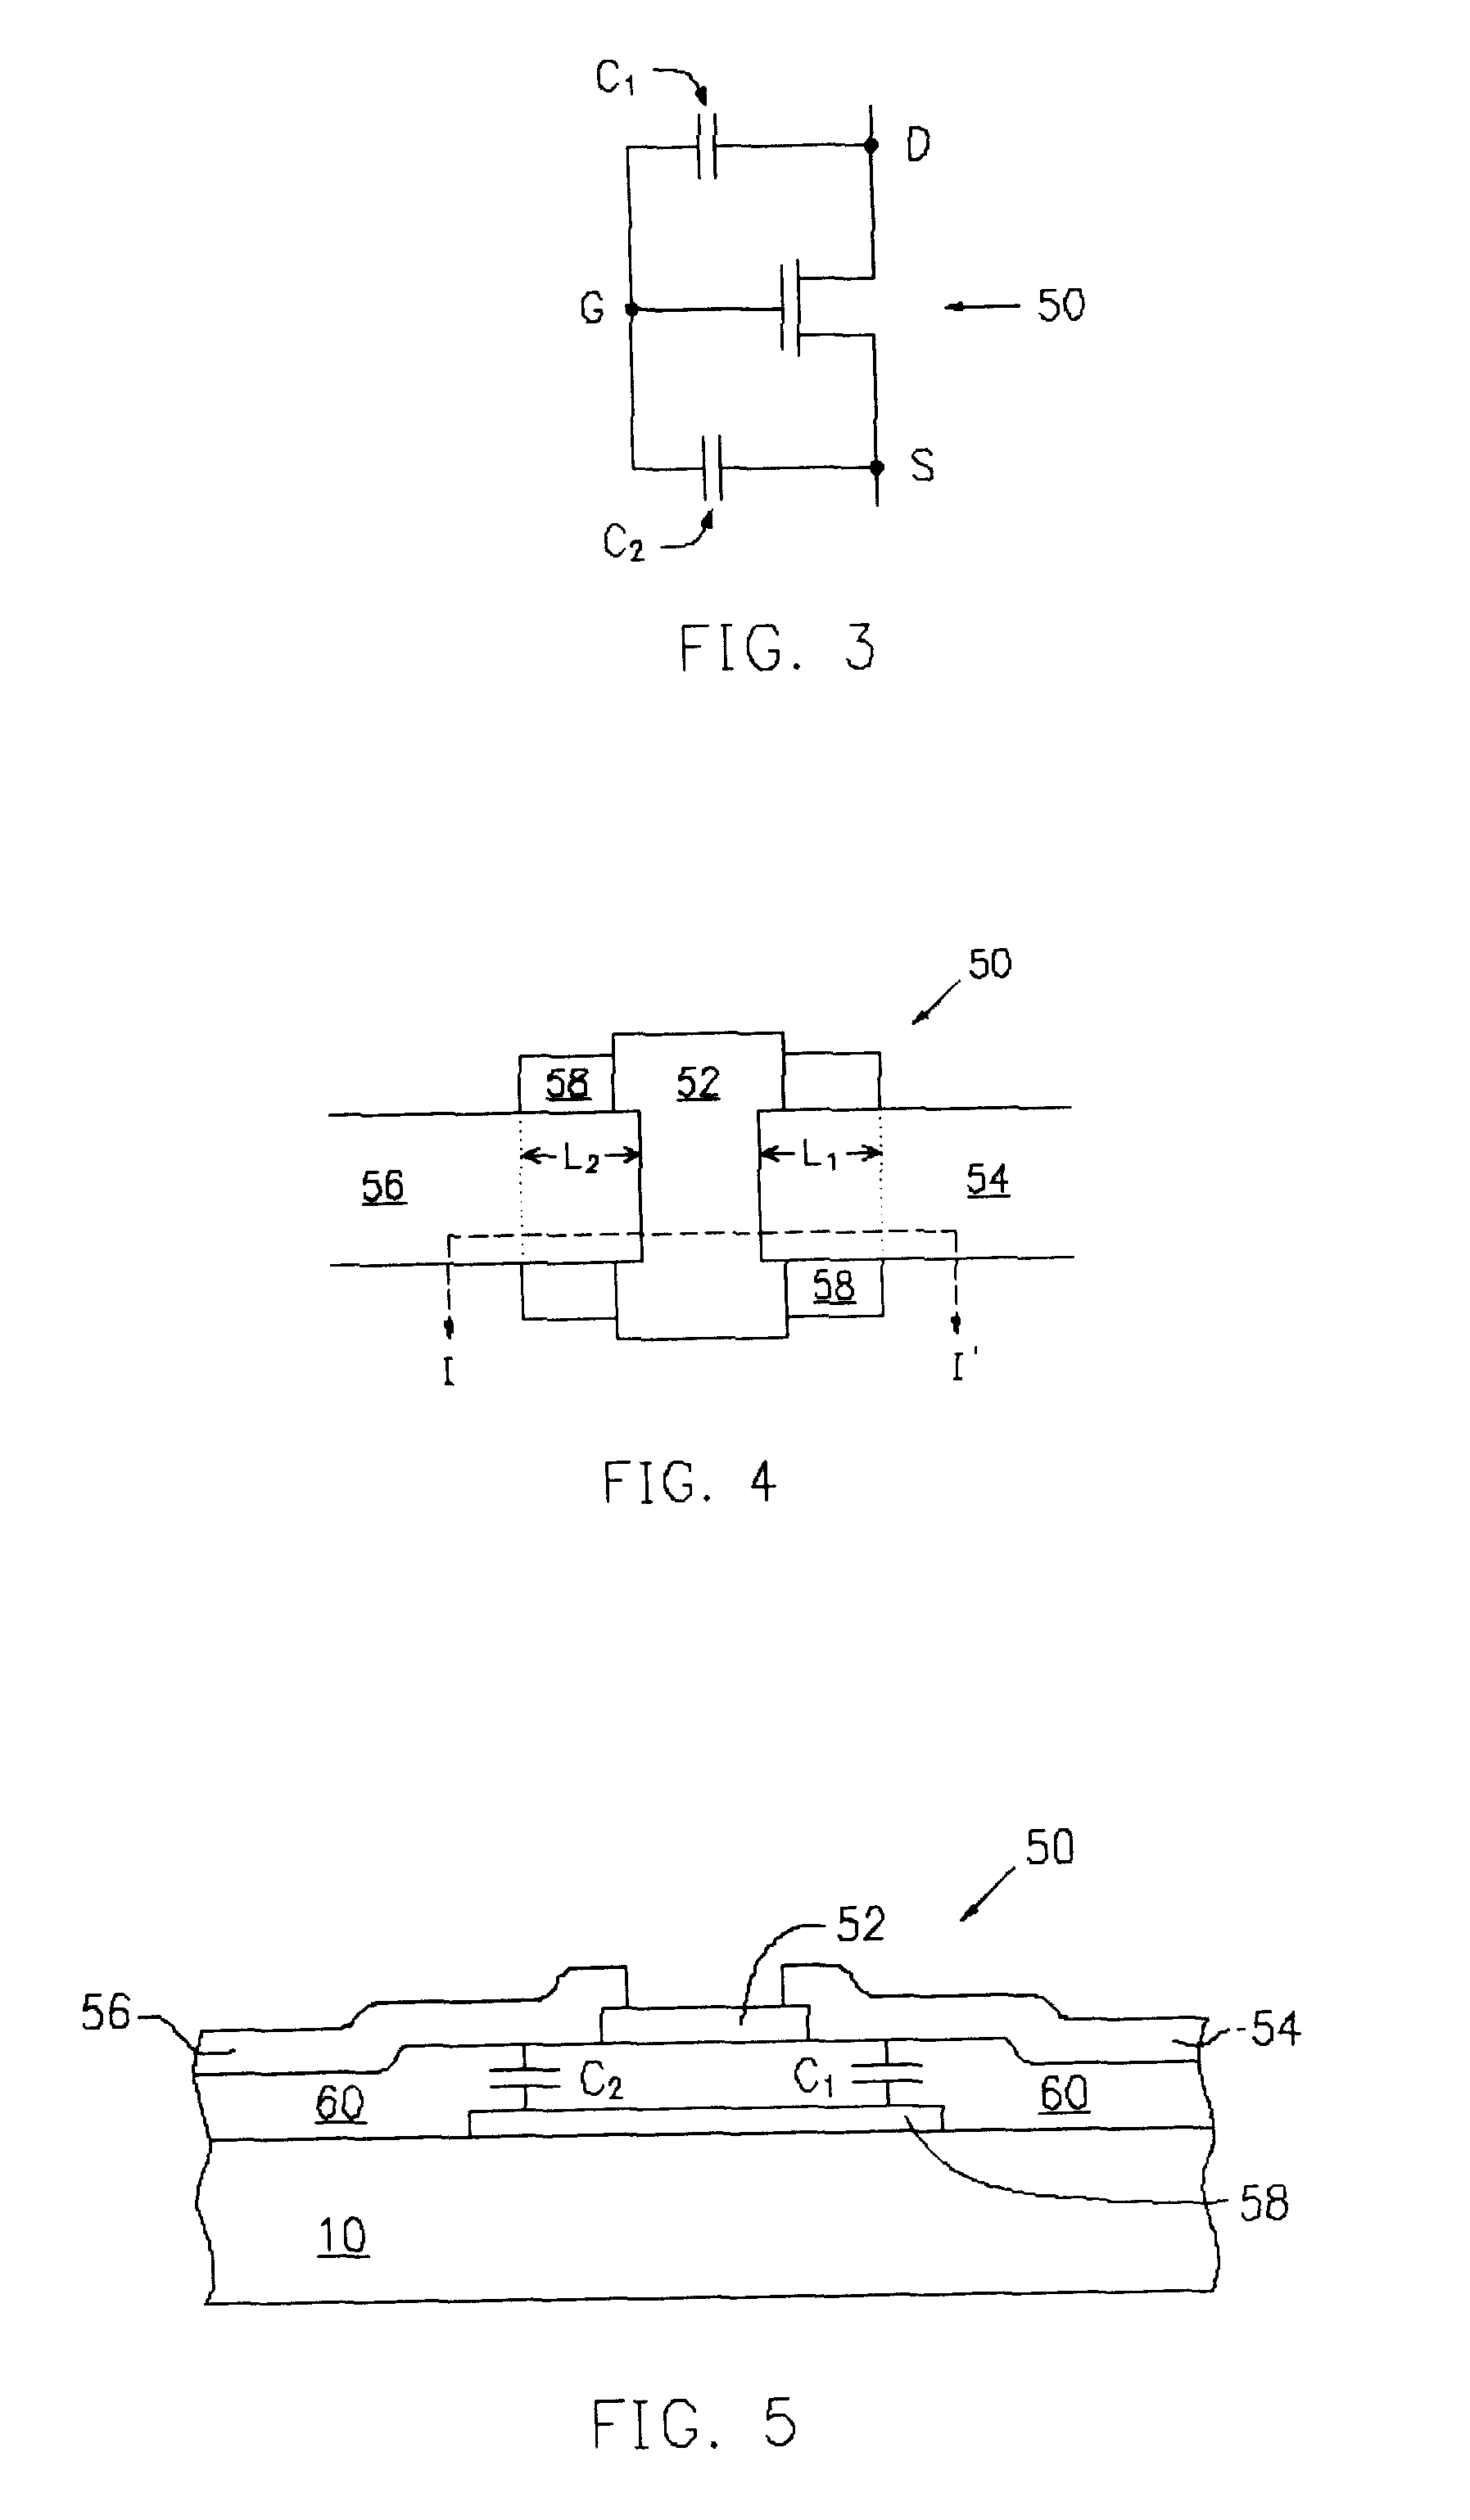 Capacitively coupled field effect transistors for electrostatic discharge protection in flat panel displays